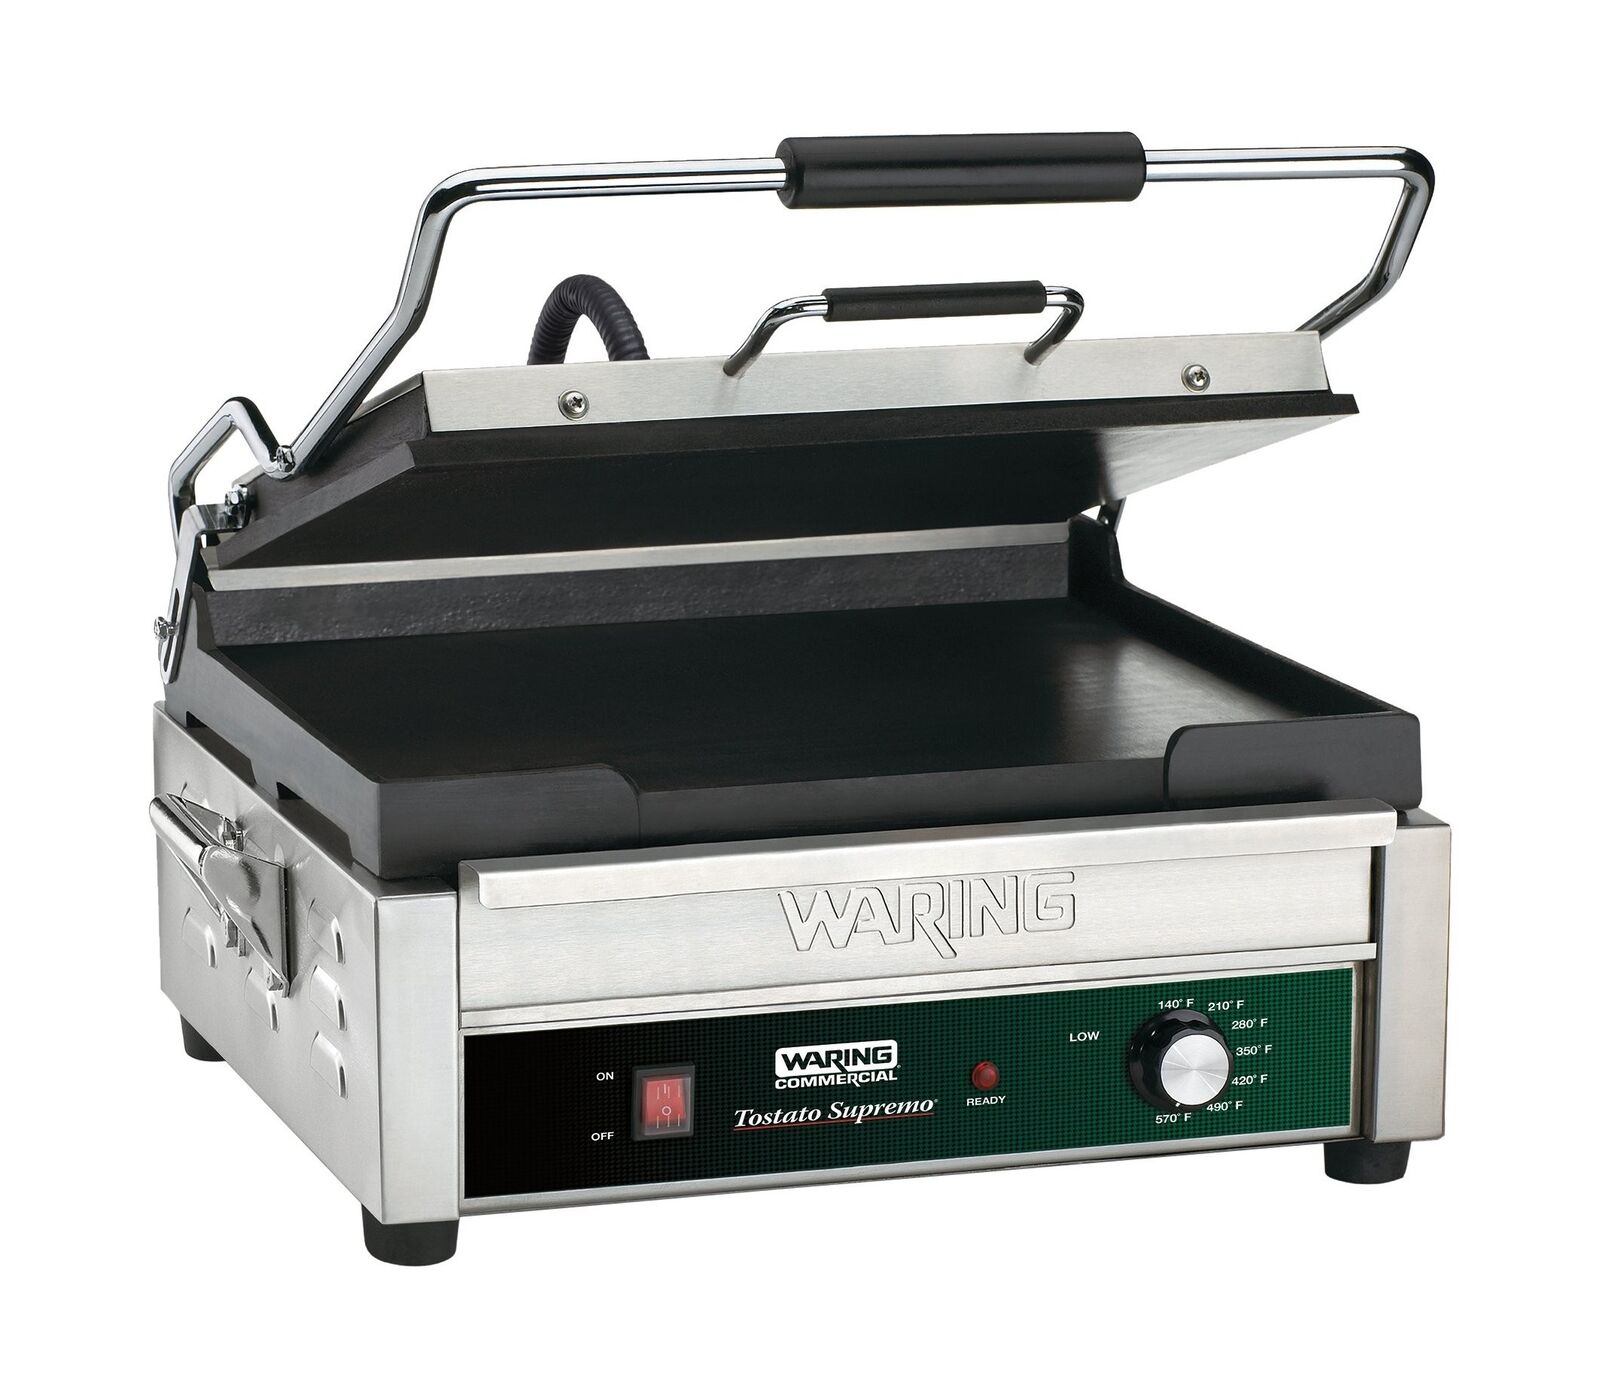 Waring Commercial Wfg275 Full Sized 14" X 14" Flat Toasting Grill, 120v, 1800...